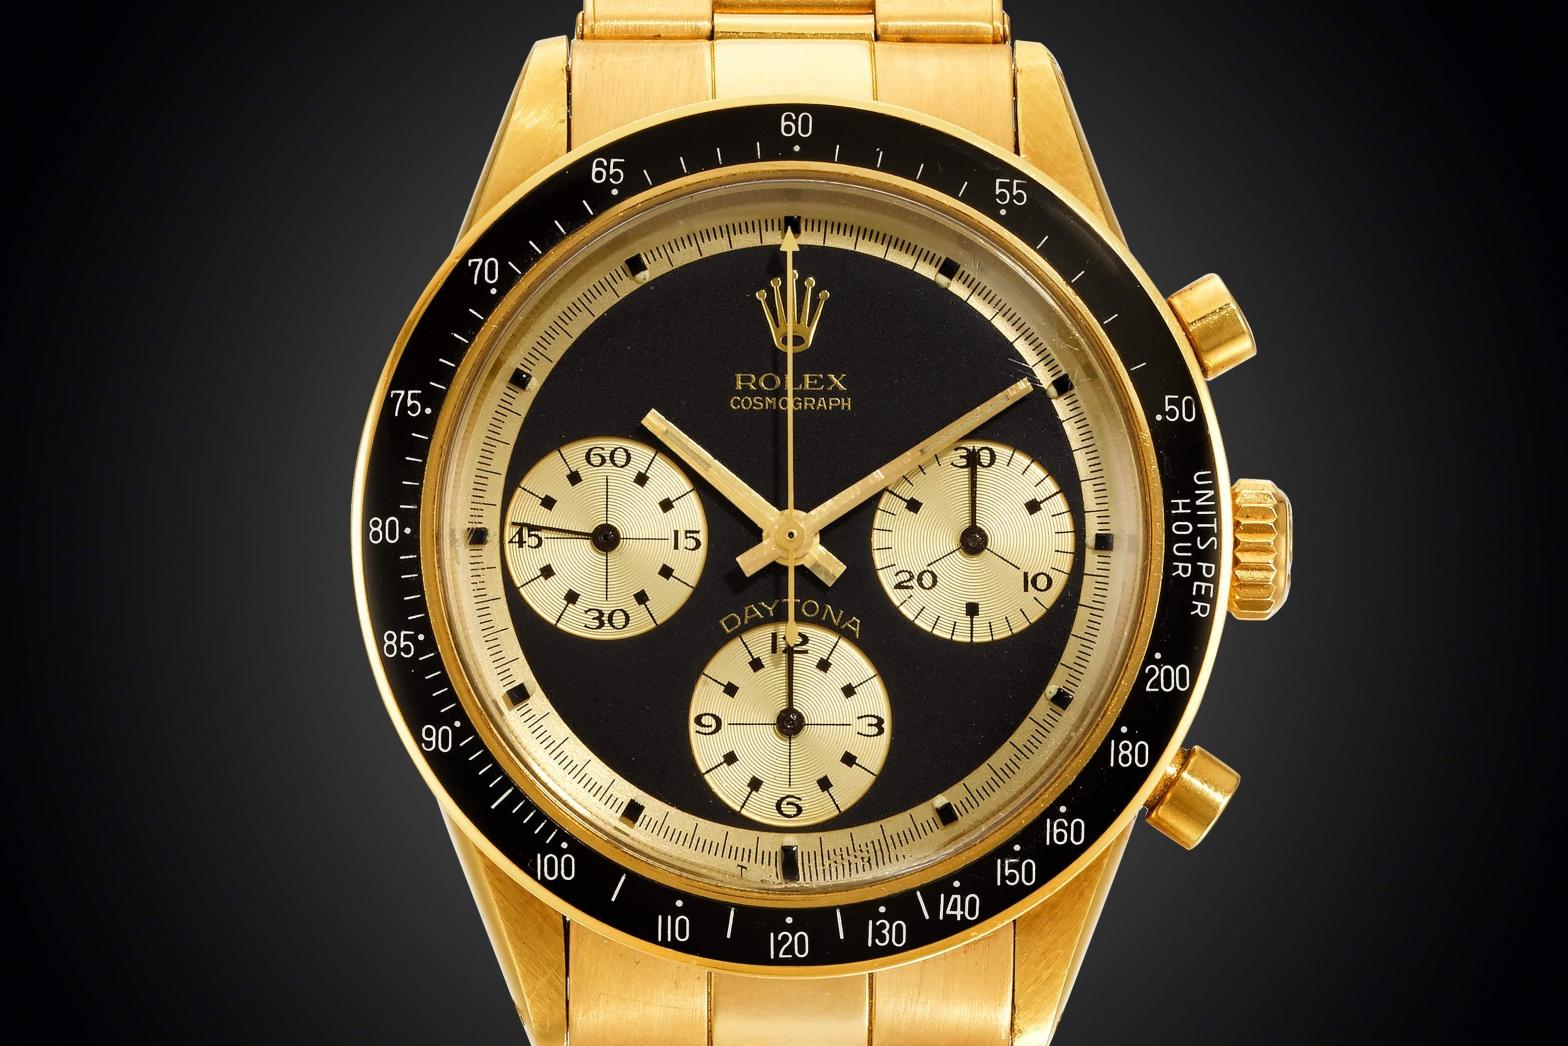 An 18k gold Rolex John Player Special Ref. 6264 sold for US$1.54 million in an online-only auction last year.